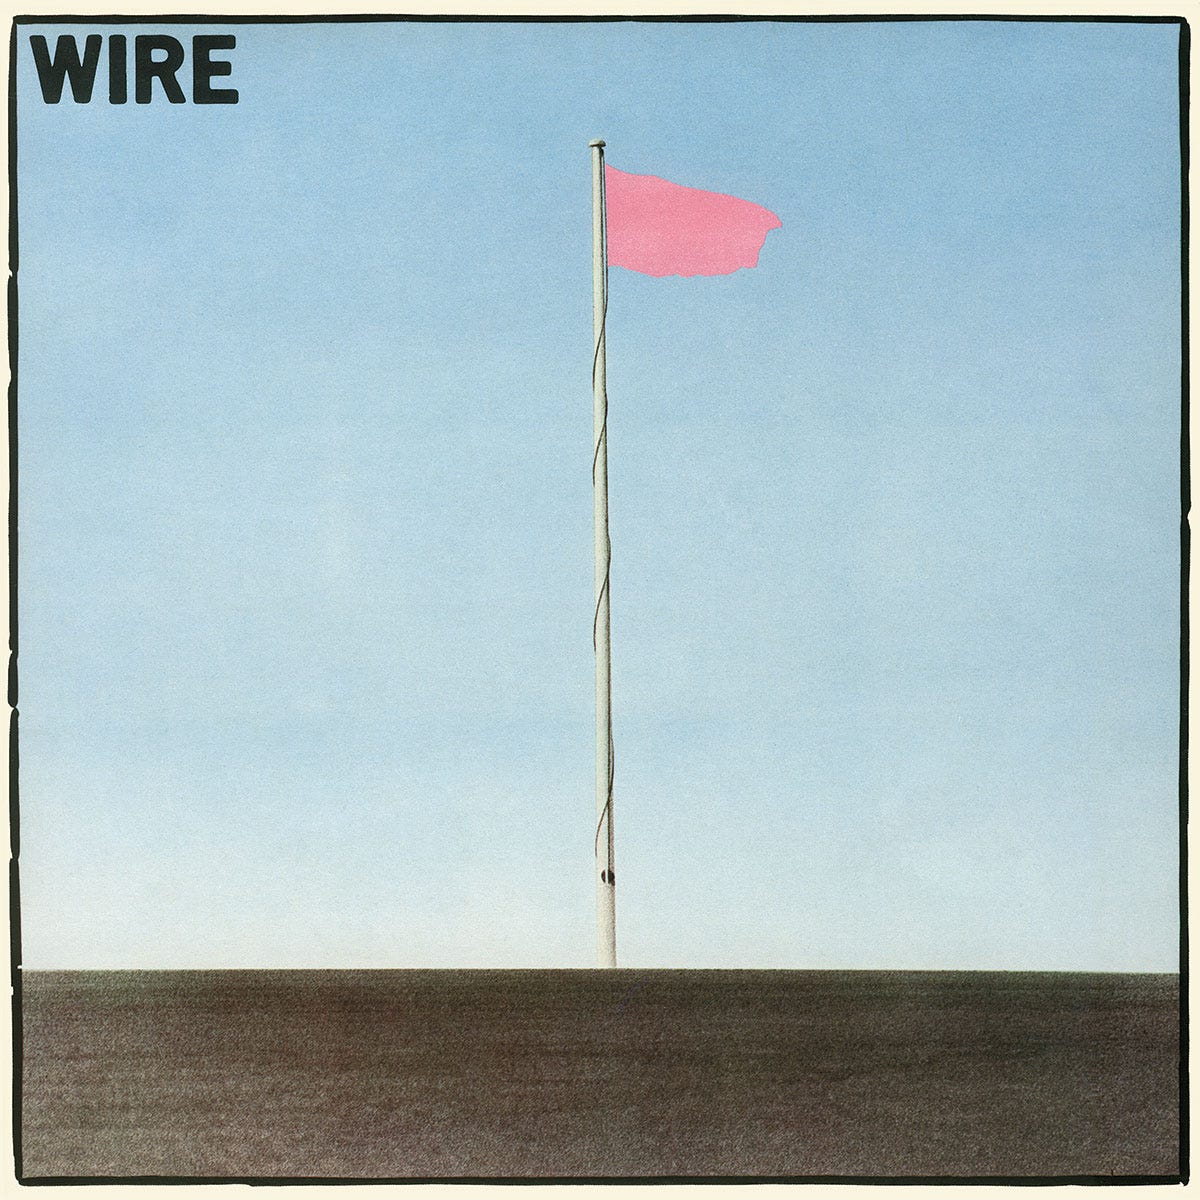 Pinkflag.com (the official Wire website) - The special editions: Pink Flag